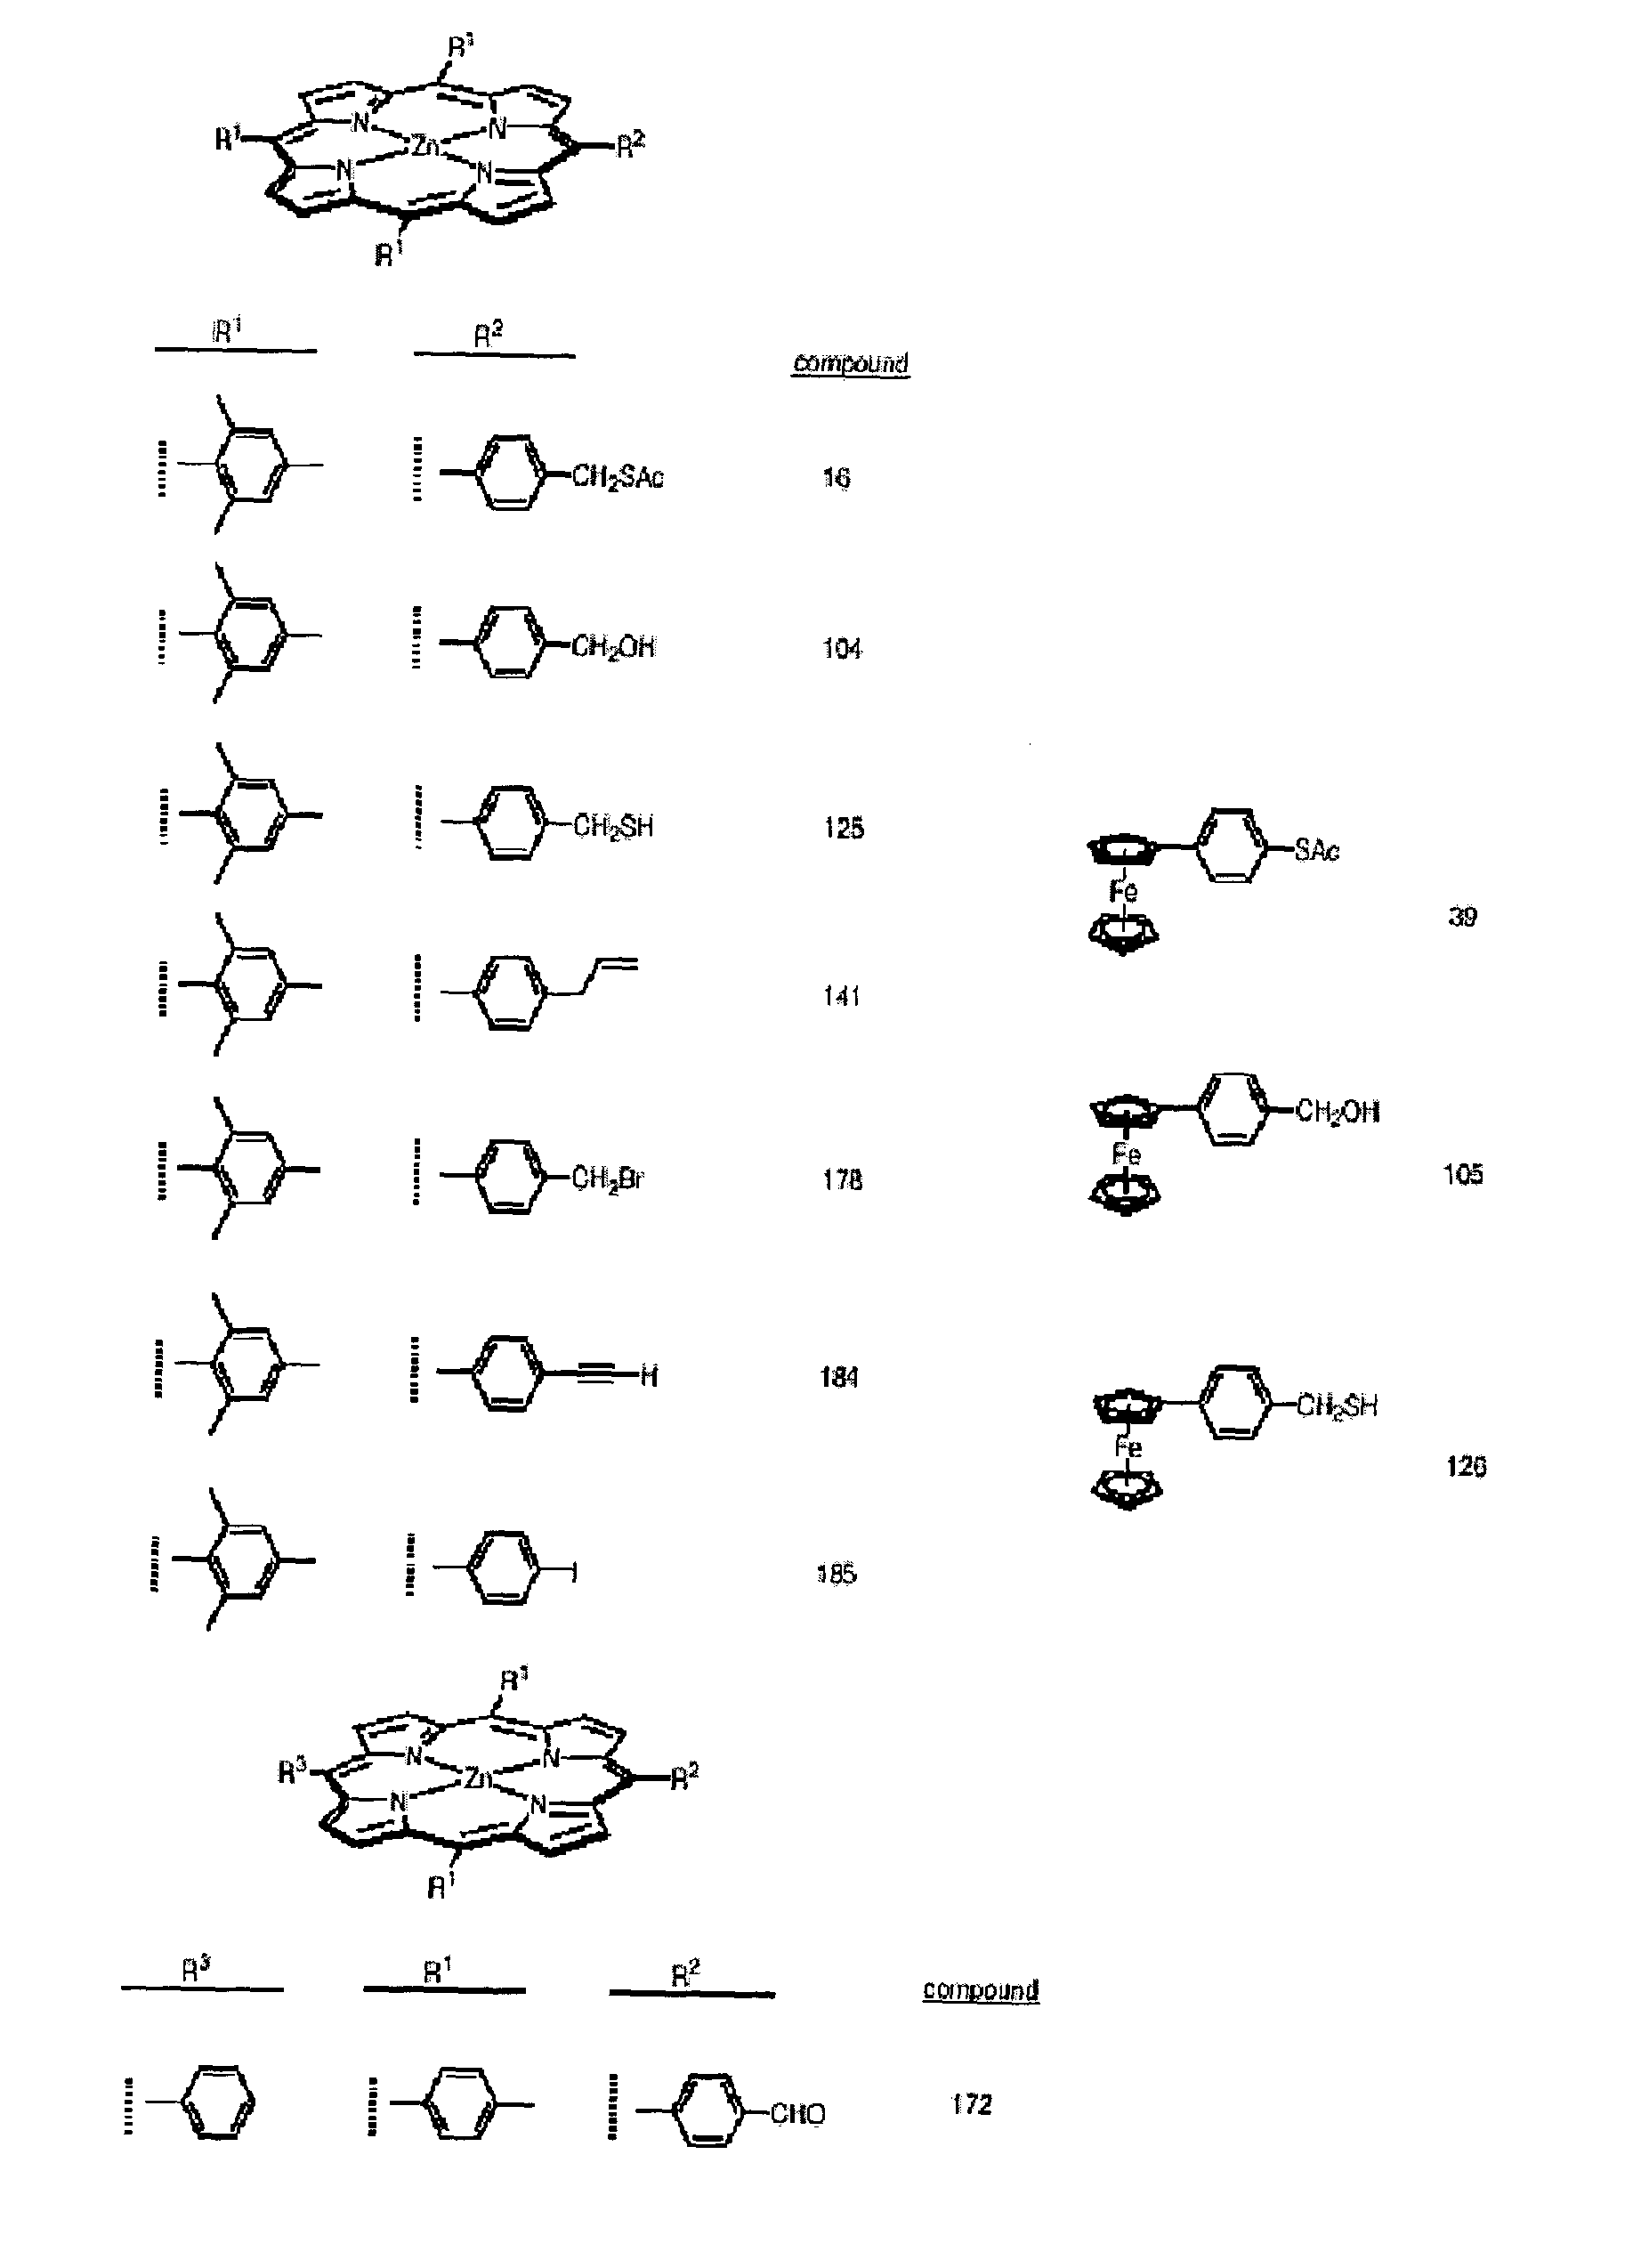 Attachment of organic molecules to group III, IV or V substrates